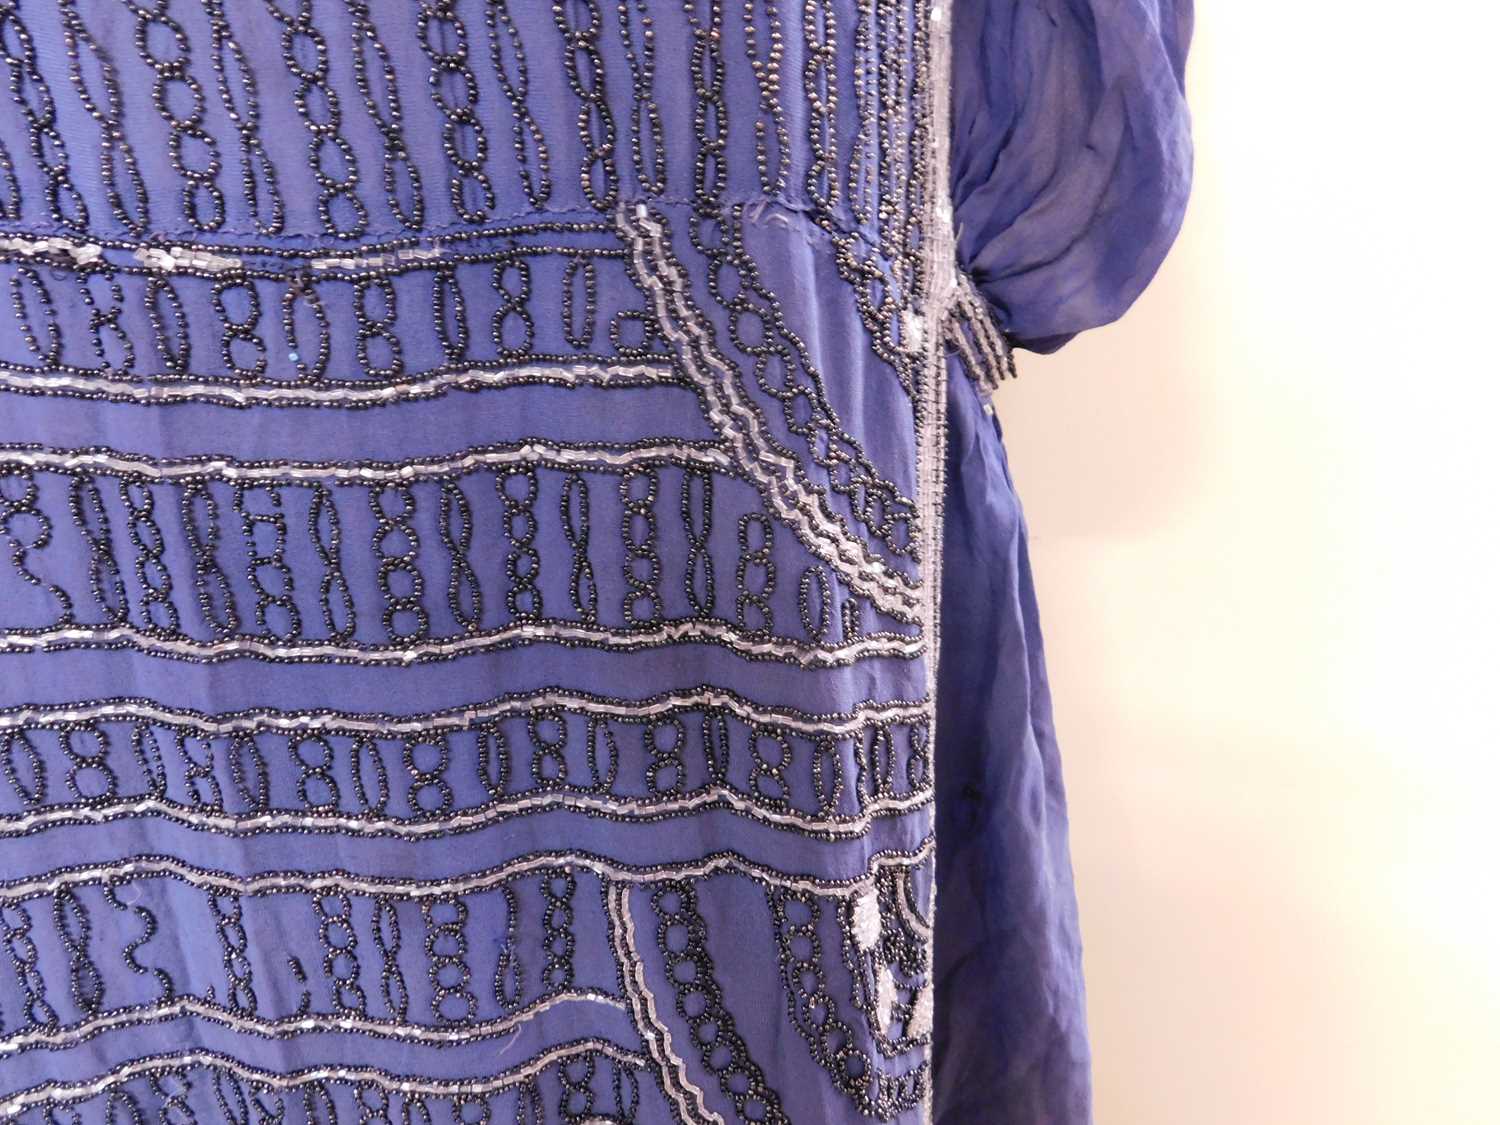 An Edwardian beaded dress, the blue chiffon dress with allover beaded detail, sleeveless - Image 10 of 14